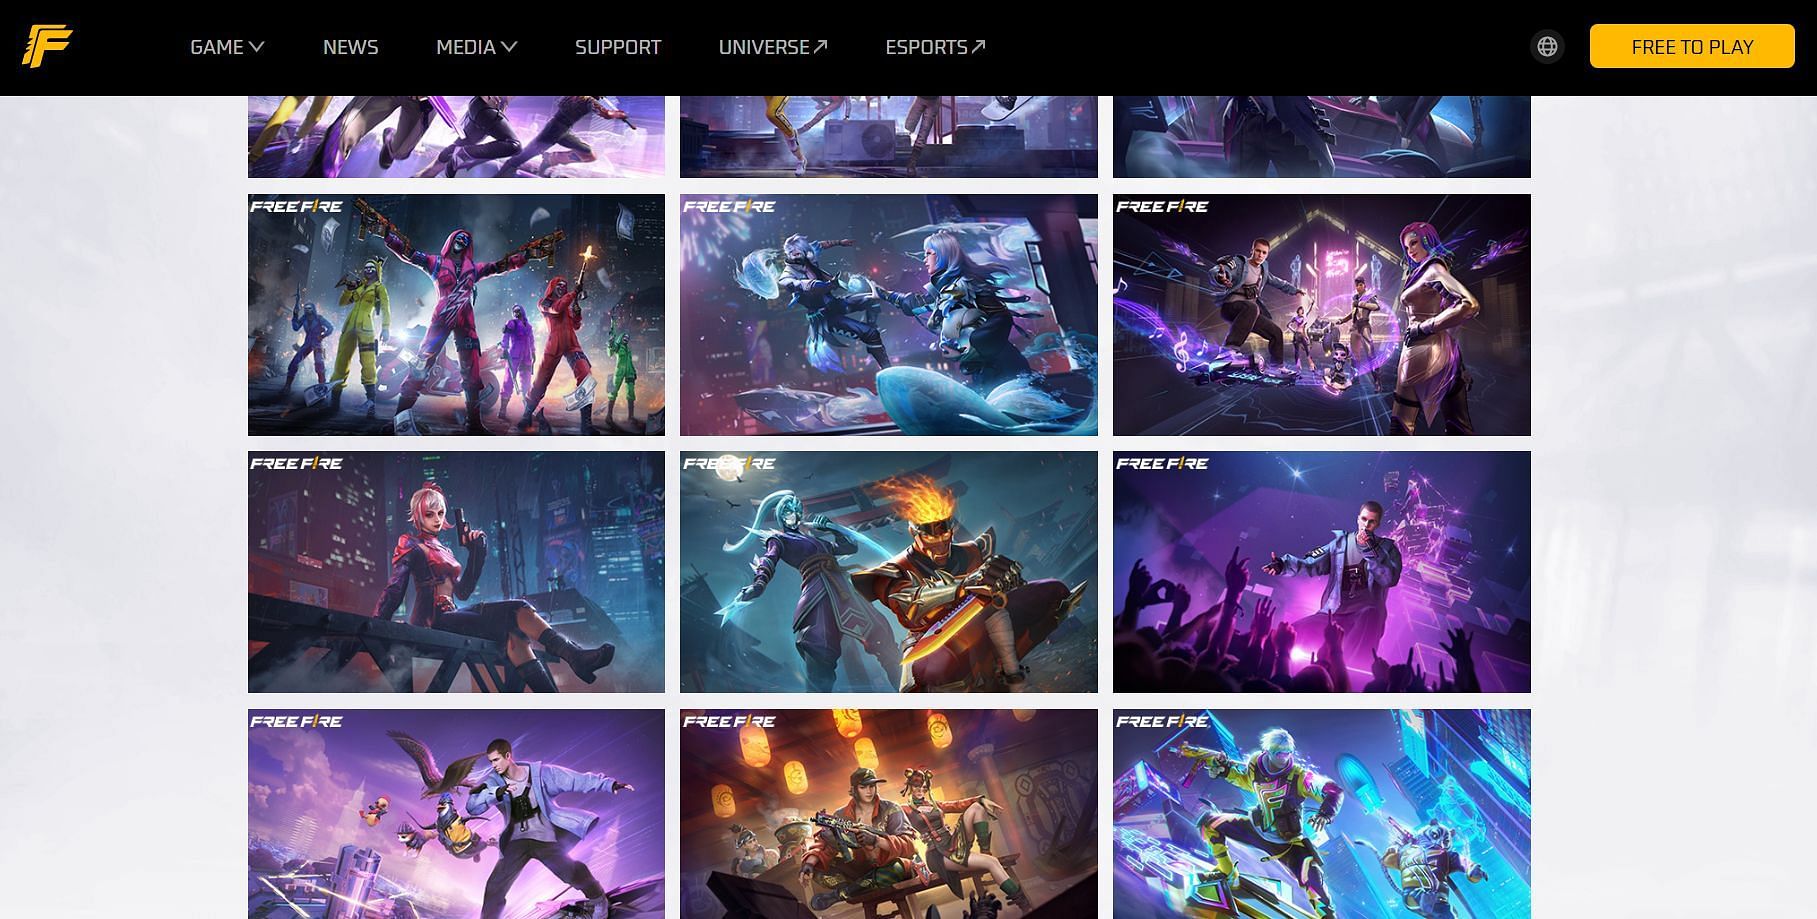 Several wallpapers are available on the official website (Image via Garena)